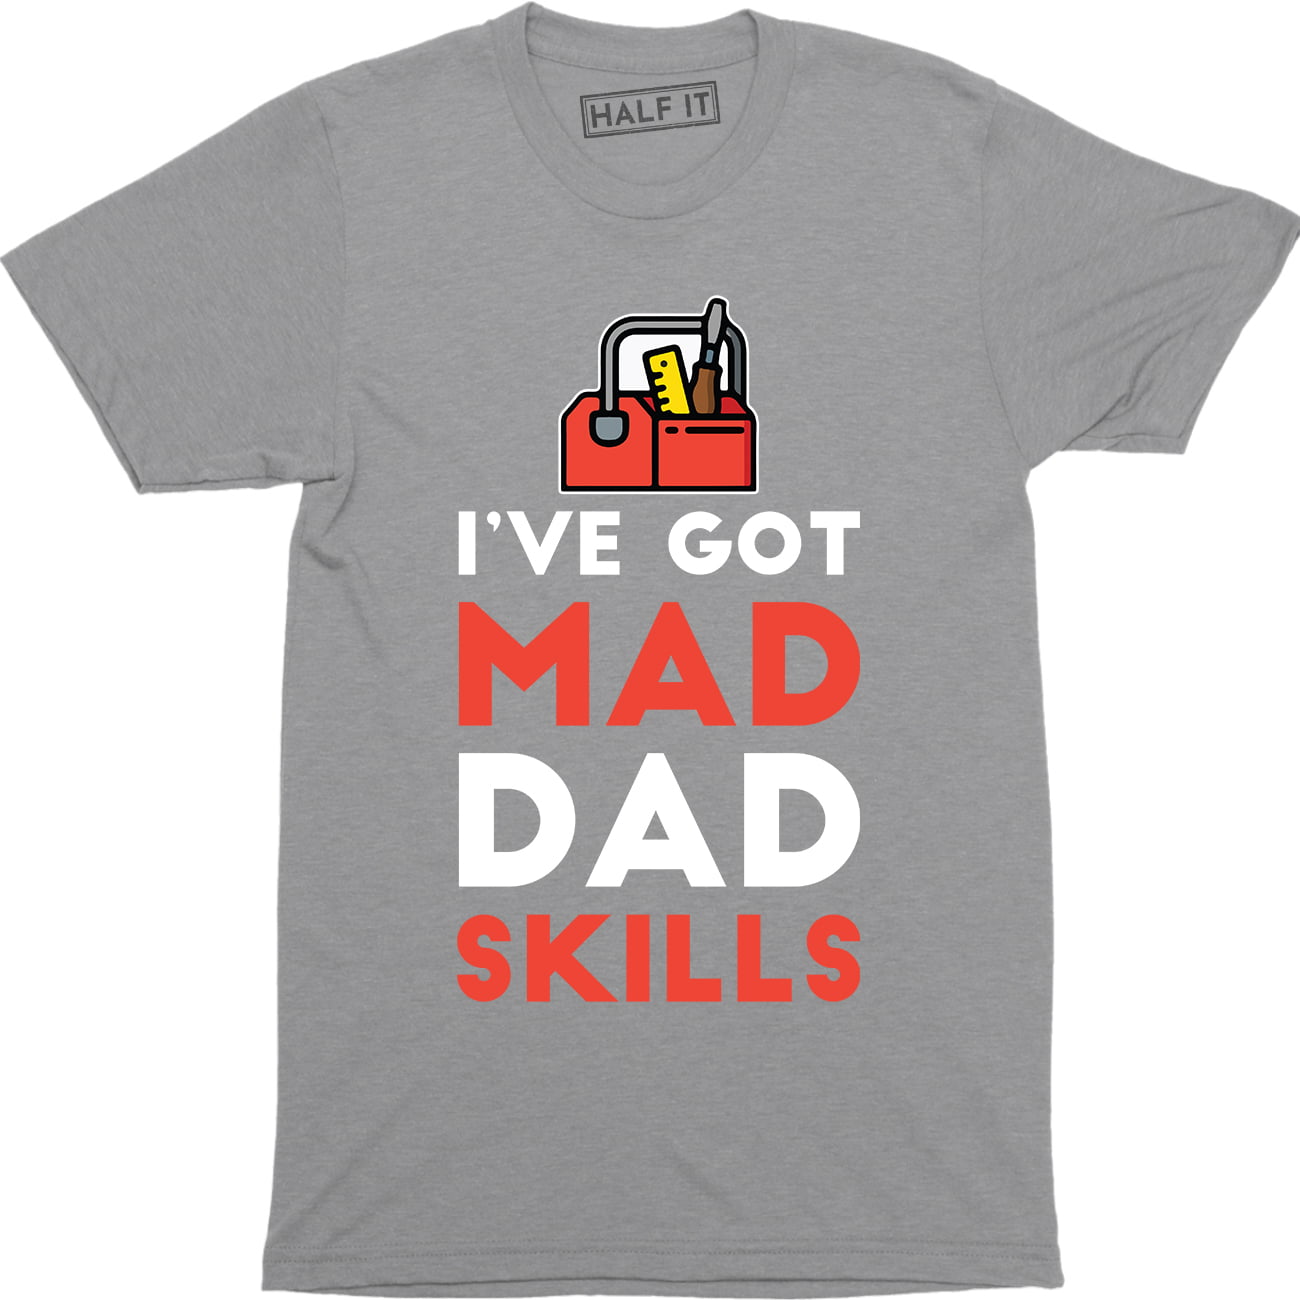 I've Got Mad Dad Skills Funny Father's Day Shirt Gift Men's T-shirt Tee